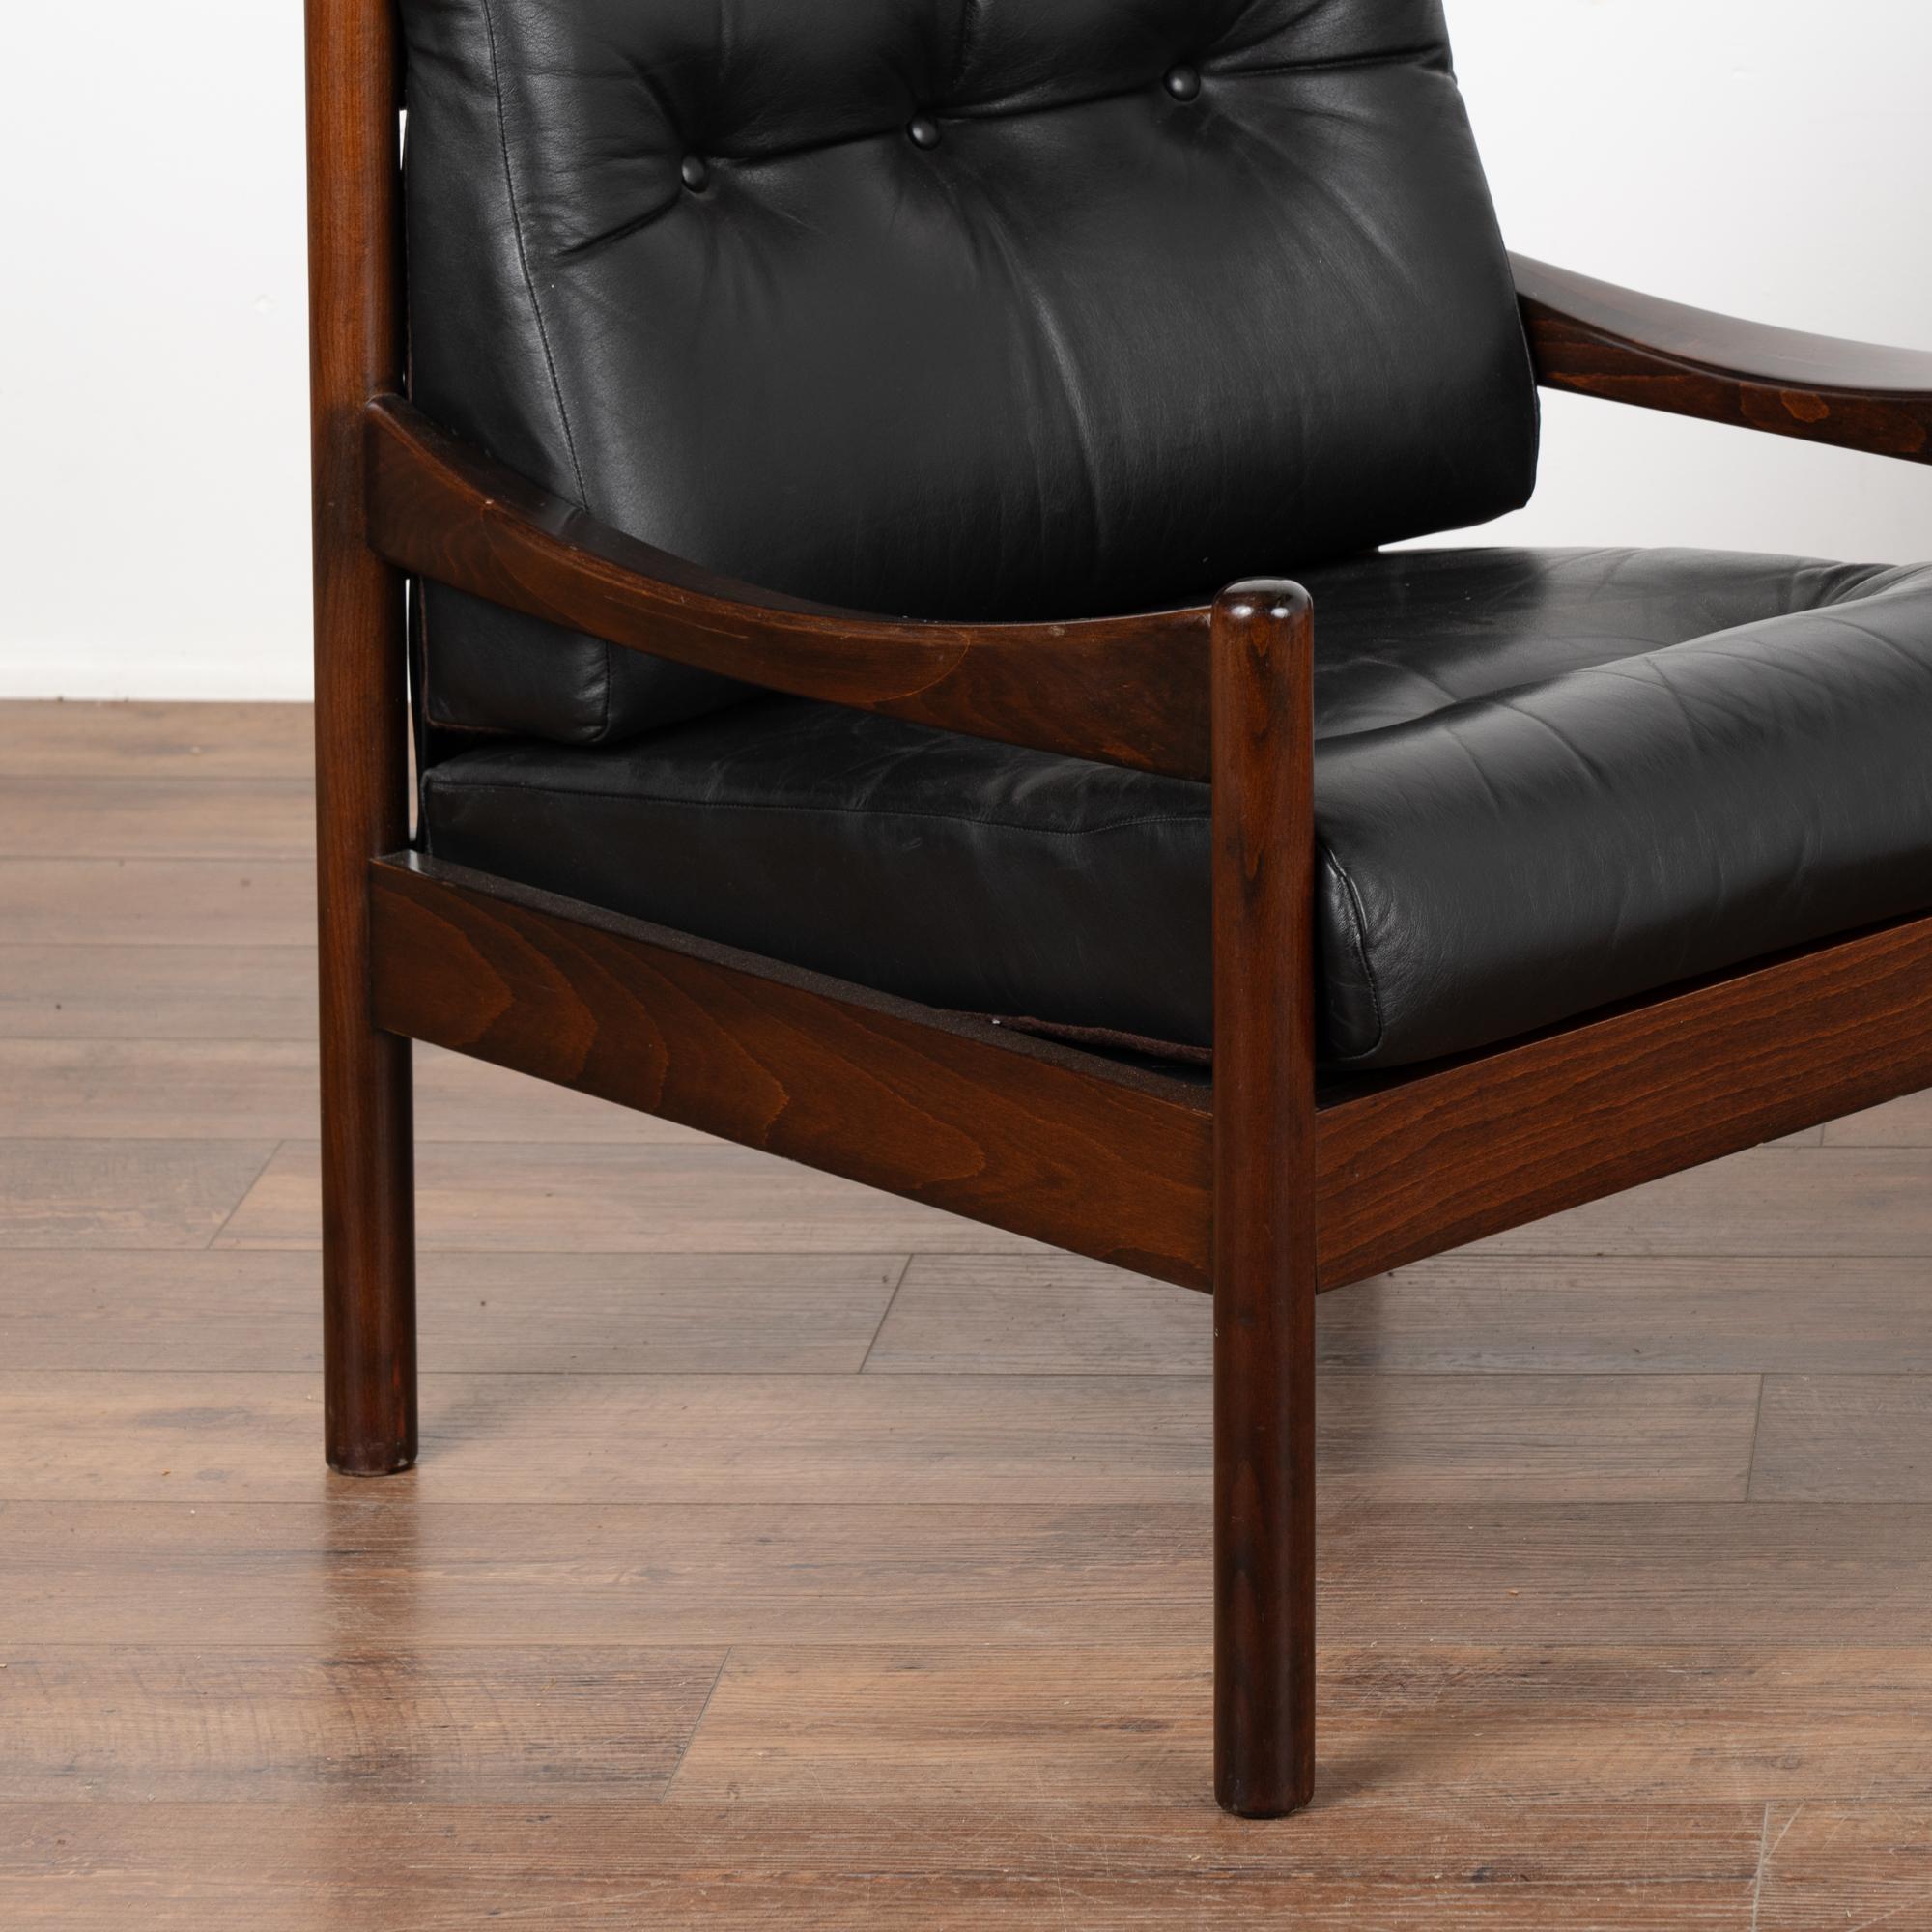 Pair, Mid Century Black Leather Arm Chairs, Denmark circa 1960 For Sale 1